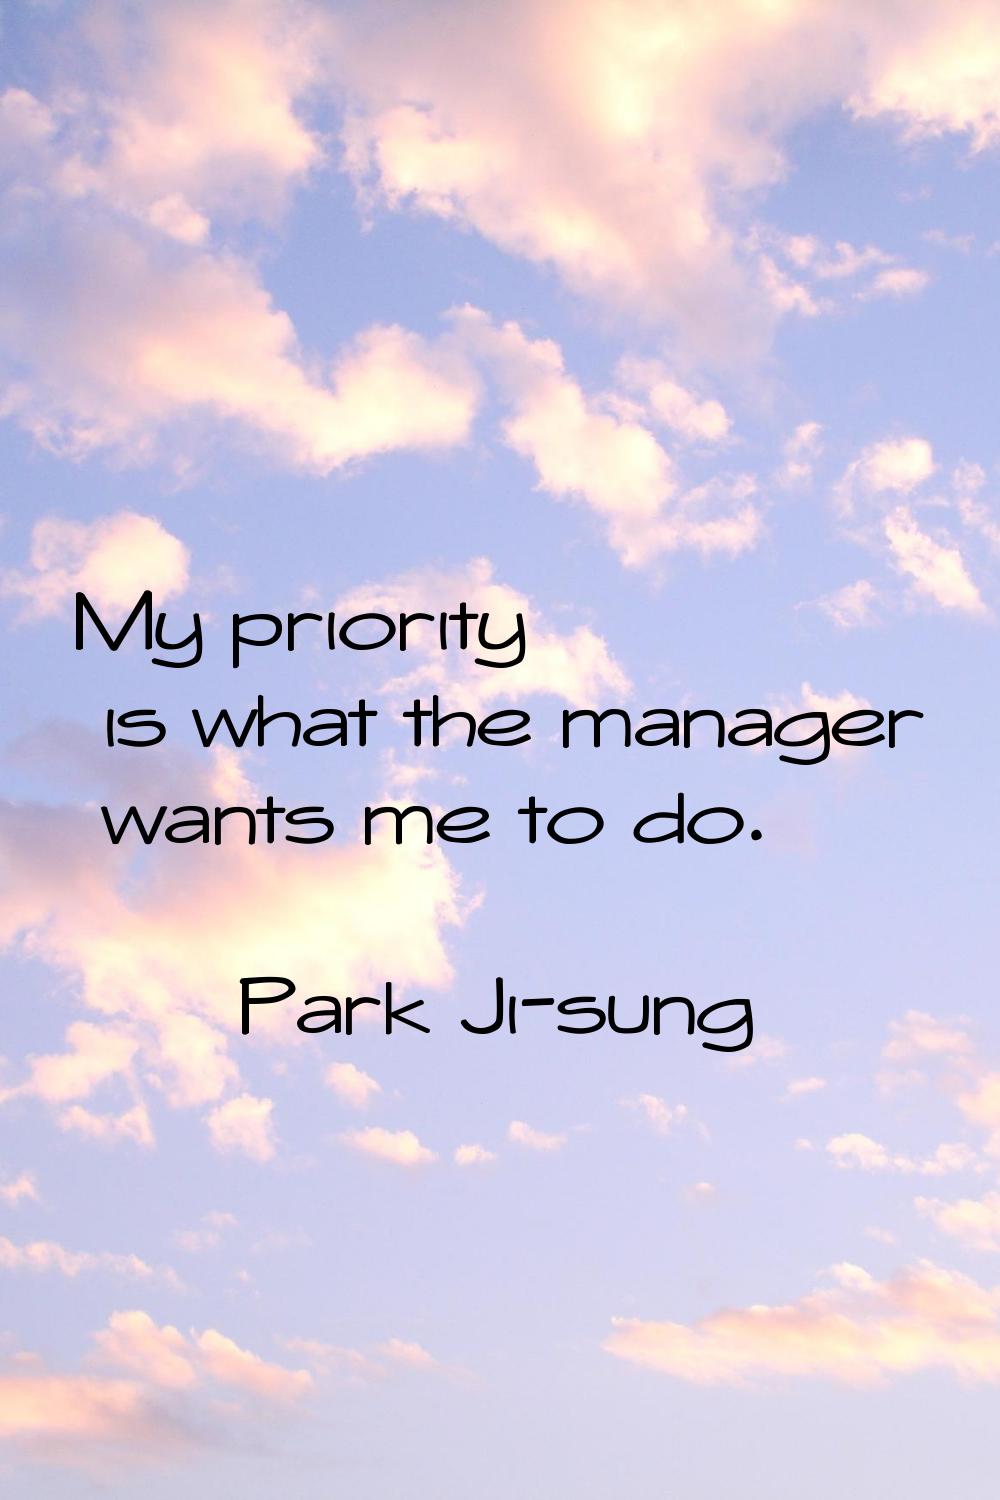 My priority is what the manager wants me to do.